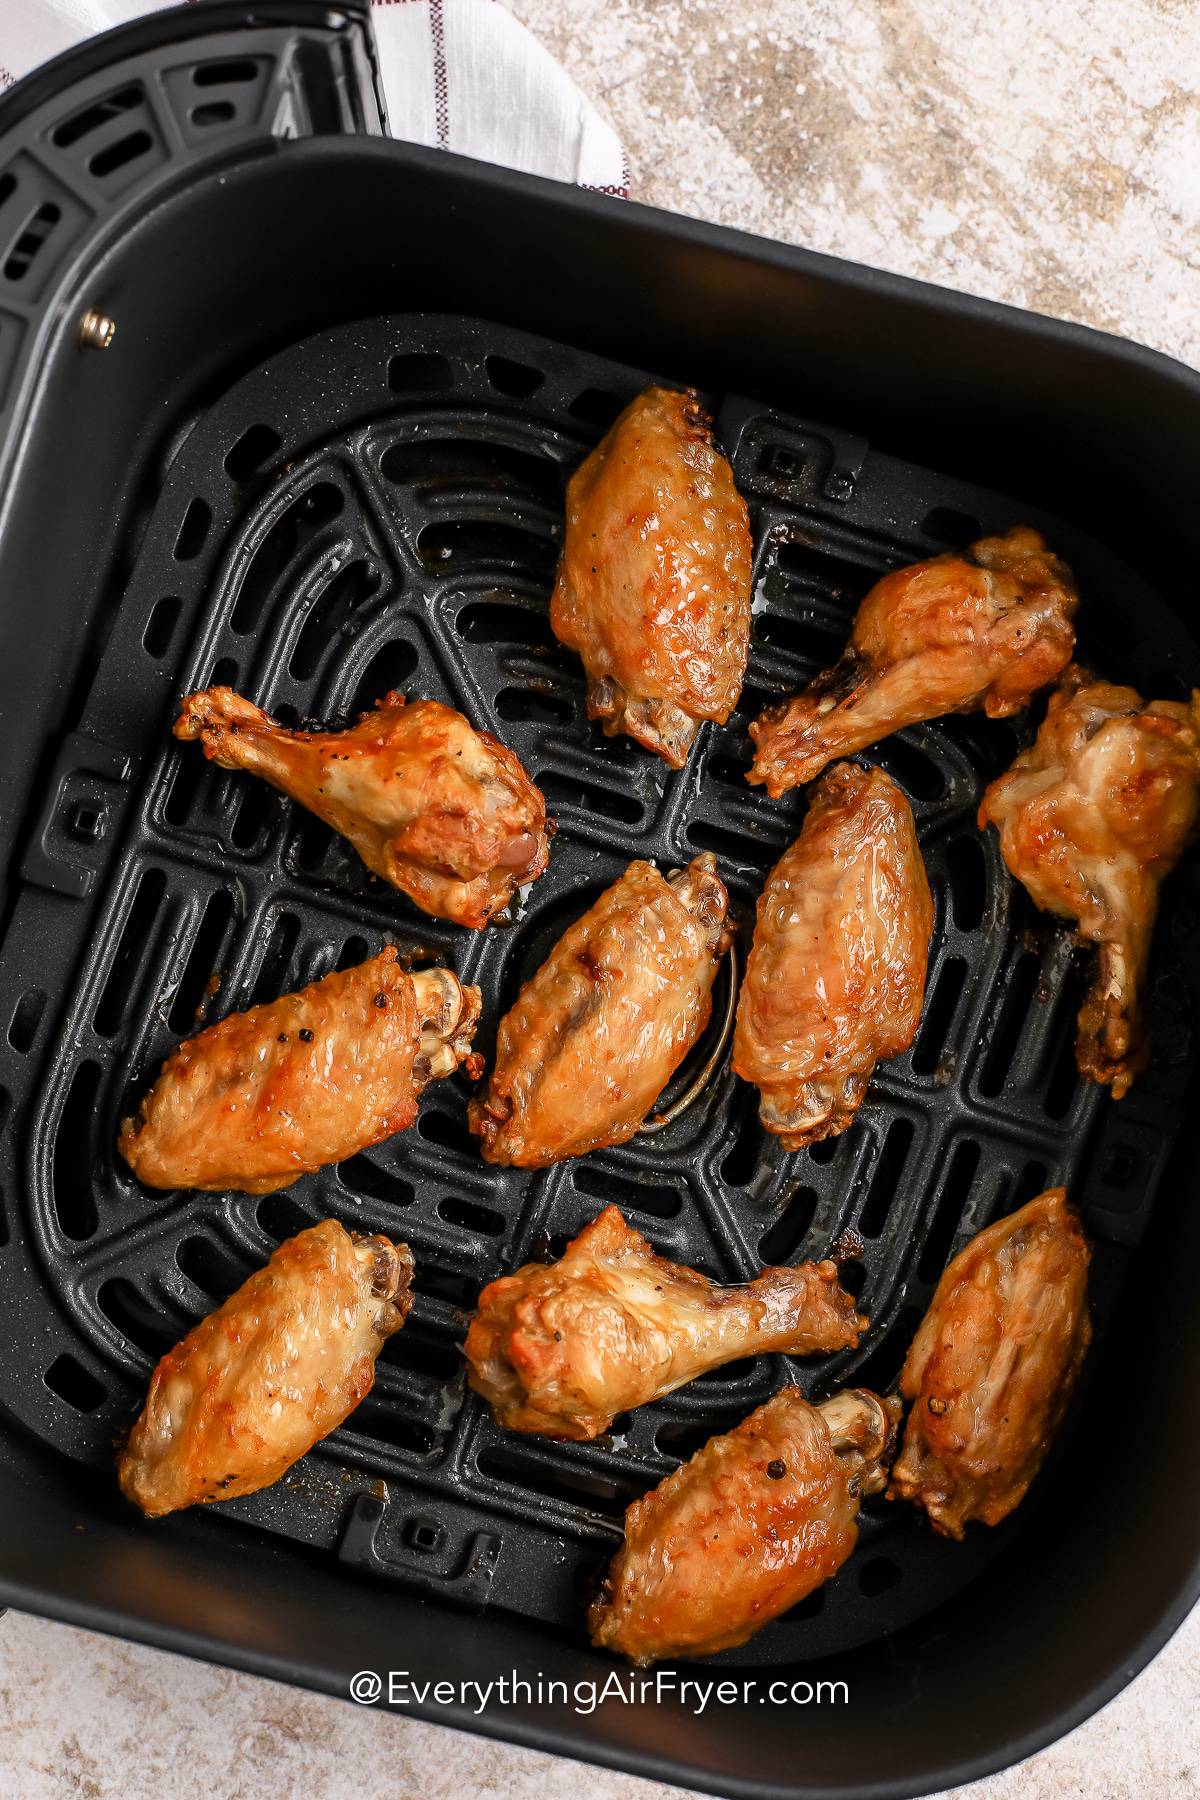 Cooked hot wings in an air fryer basket